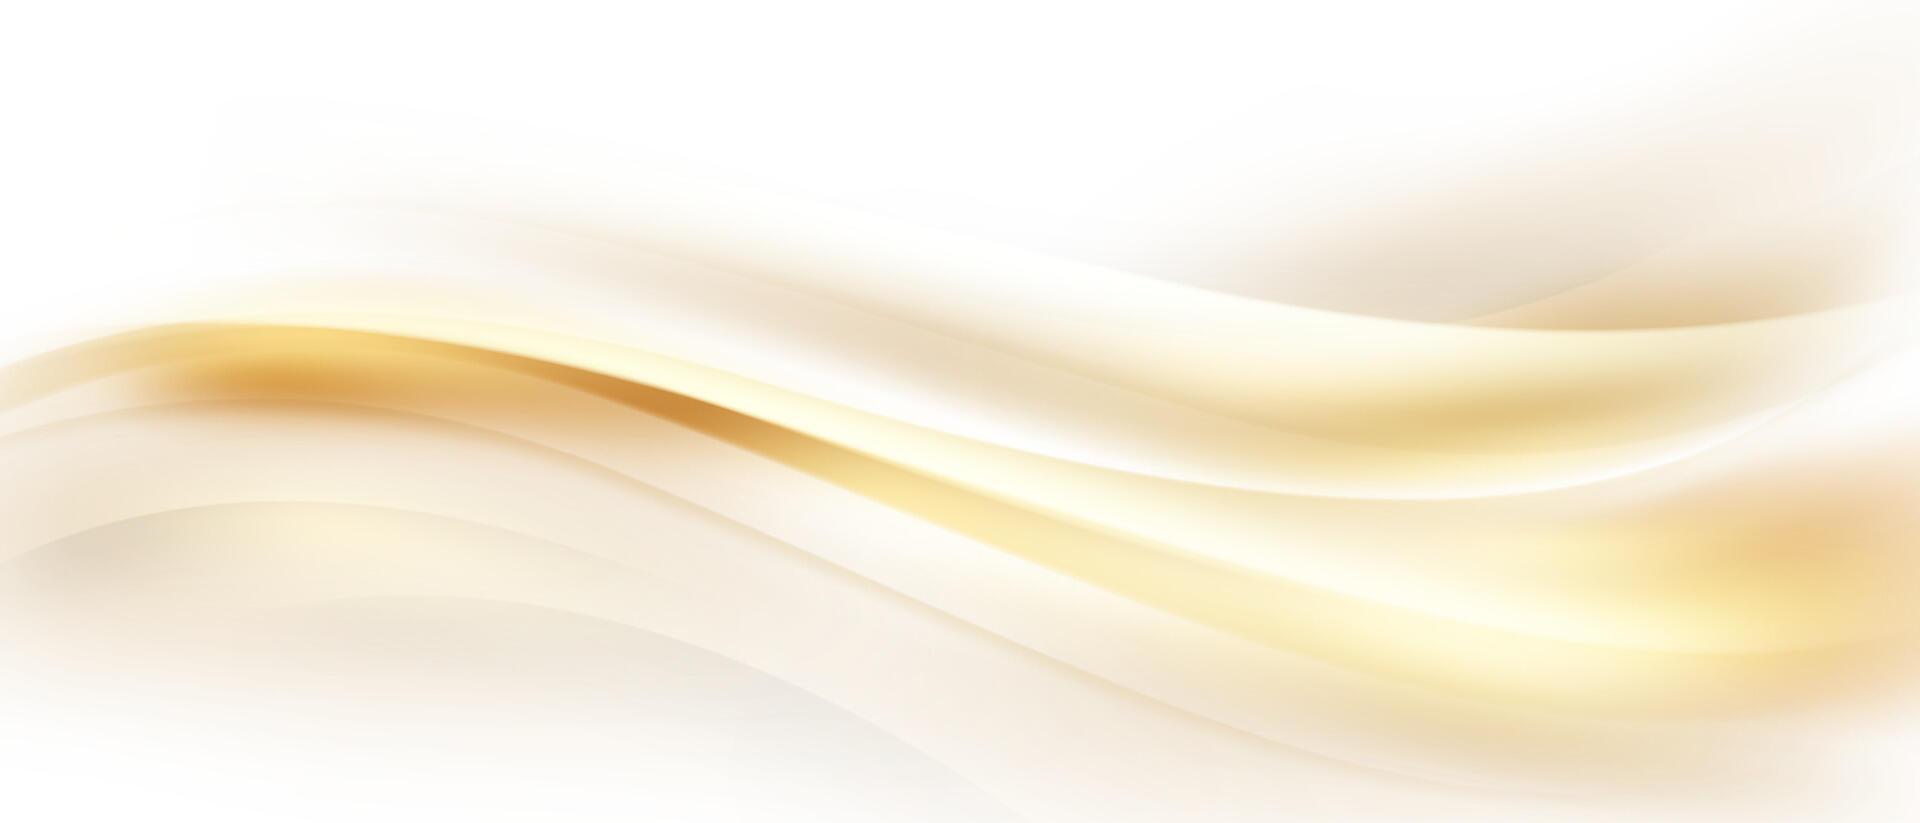 white luxury abstract background with golden elements vector illustration